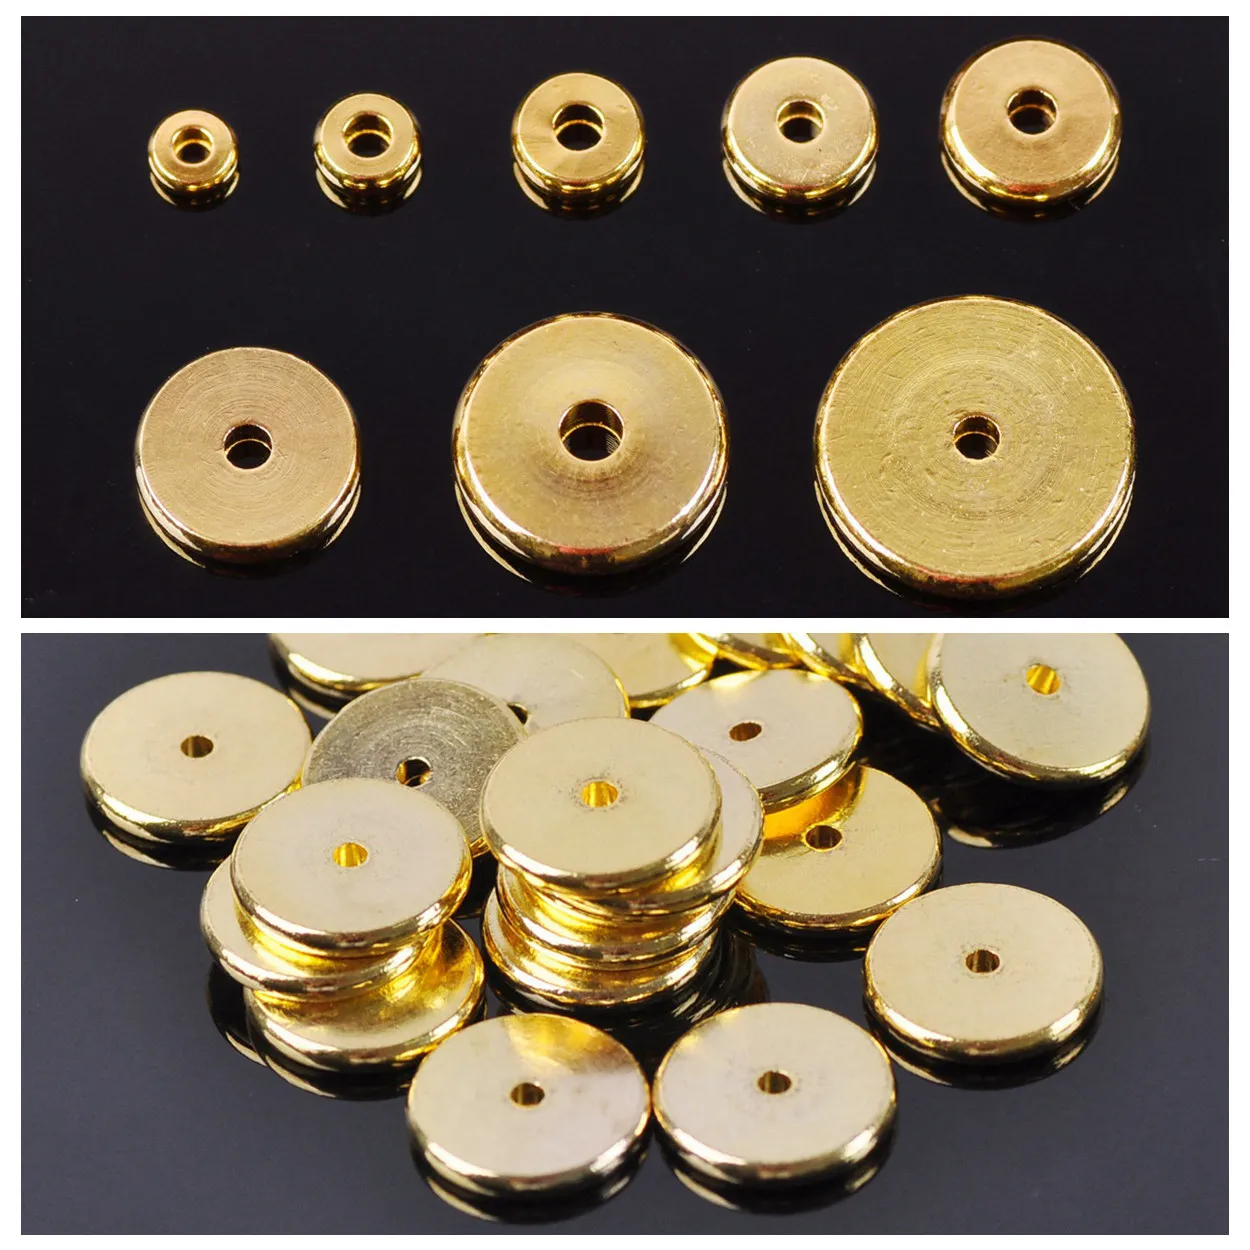 

Solid Brass Metal Gold Color Flat Round Shape 4mm 6mm 8mm 10mm 12mm 14mm Loose Spacer Beads Lot for Jewelry Making DIY Findings